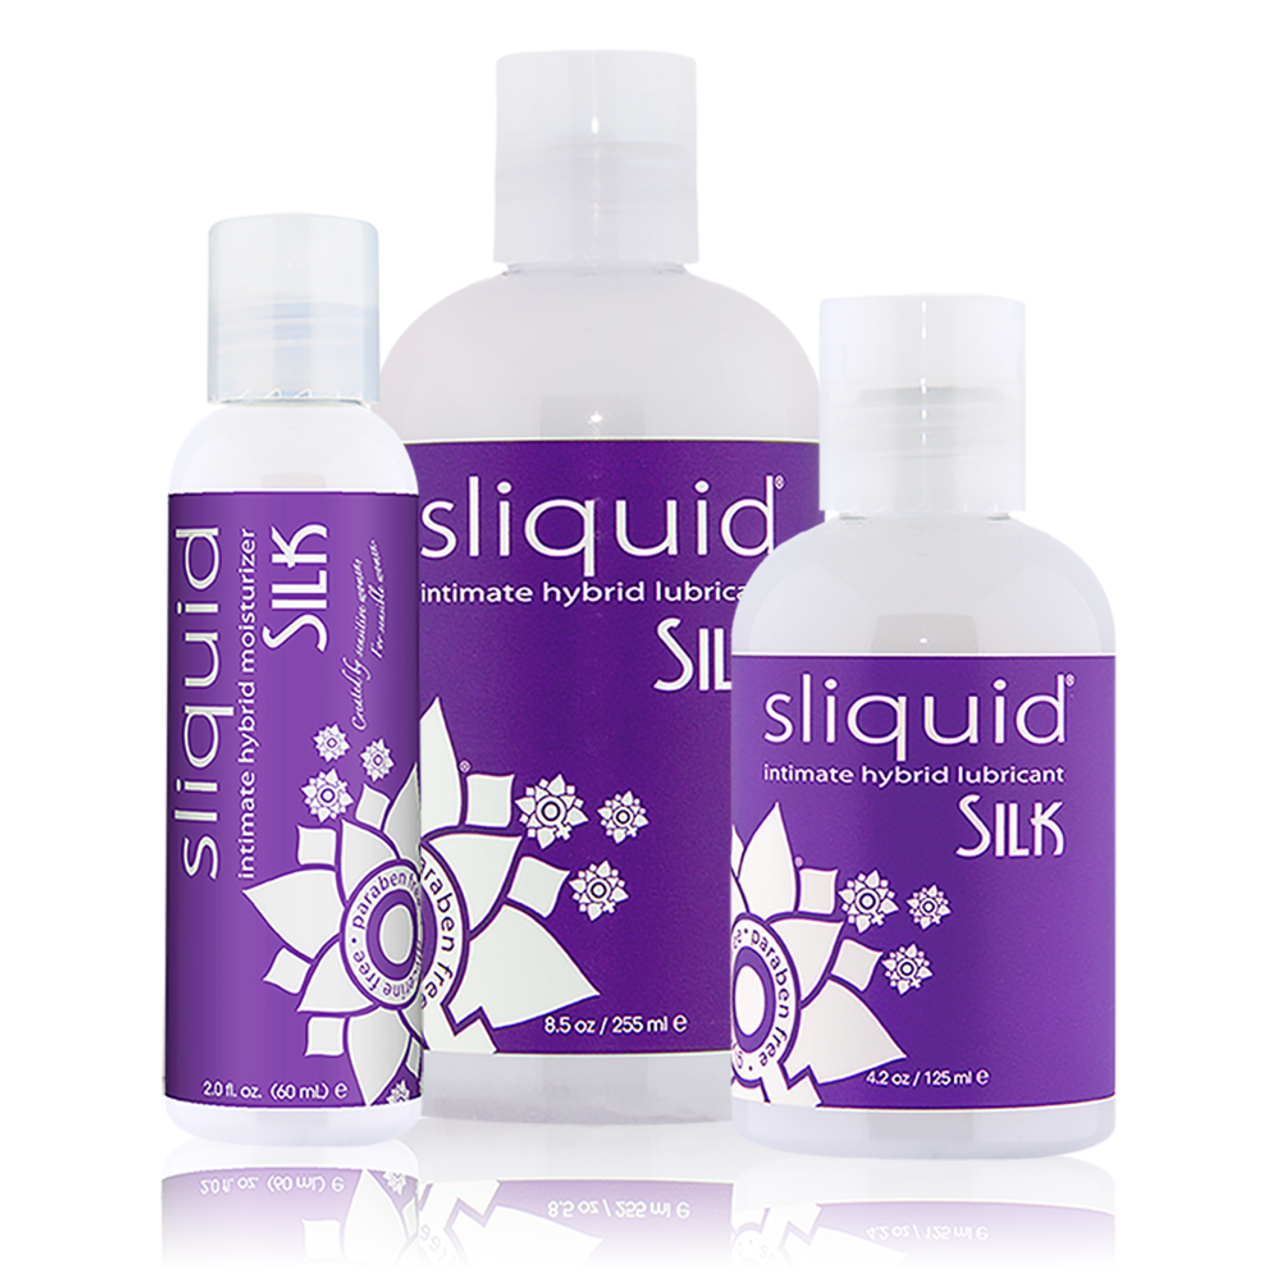 Buy Sliquid Silk Water Based Silicone Based Personal Lubricant | CondomsFast